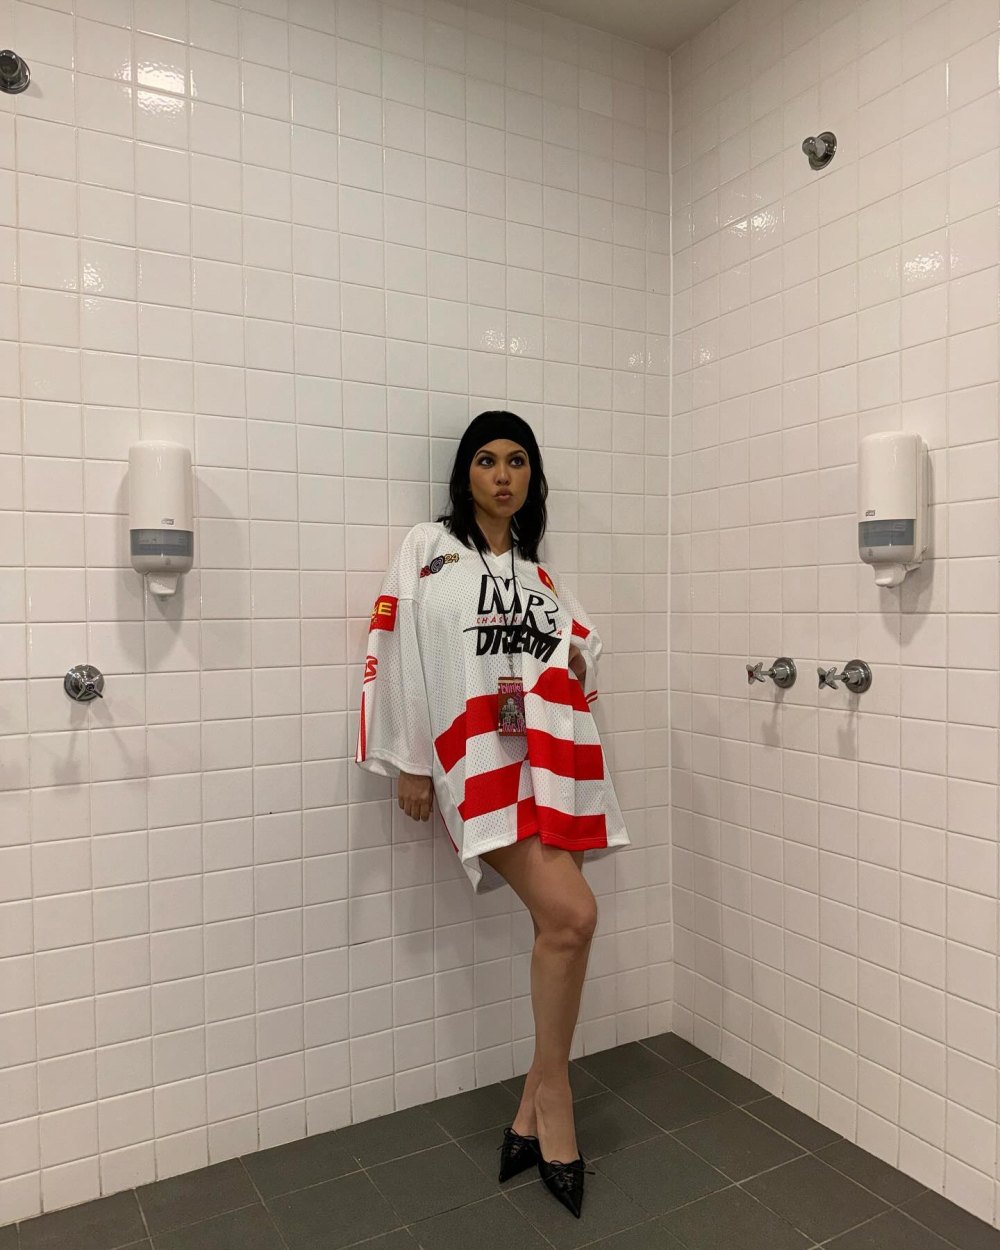 Kourtney Kardashian Embraces the Chaos at Travis Barker Concert in a Hockey Jersey and Heels